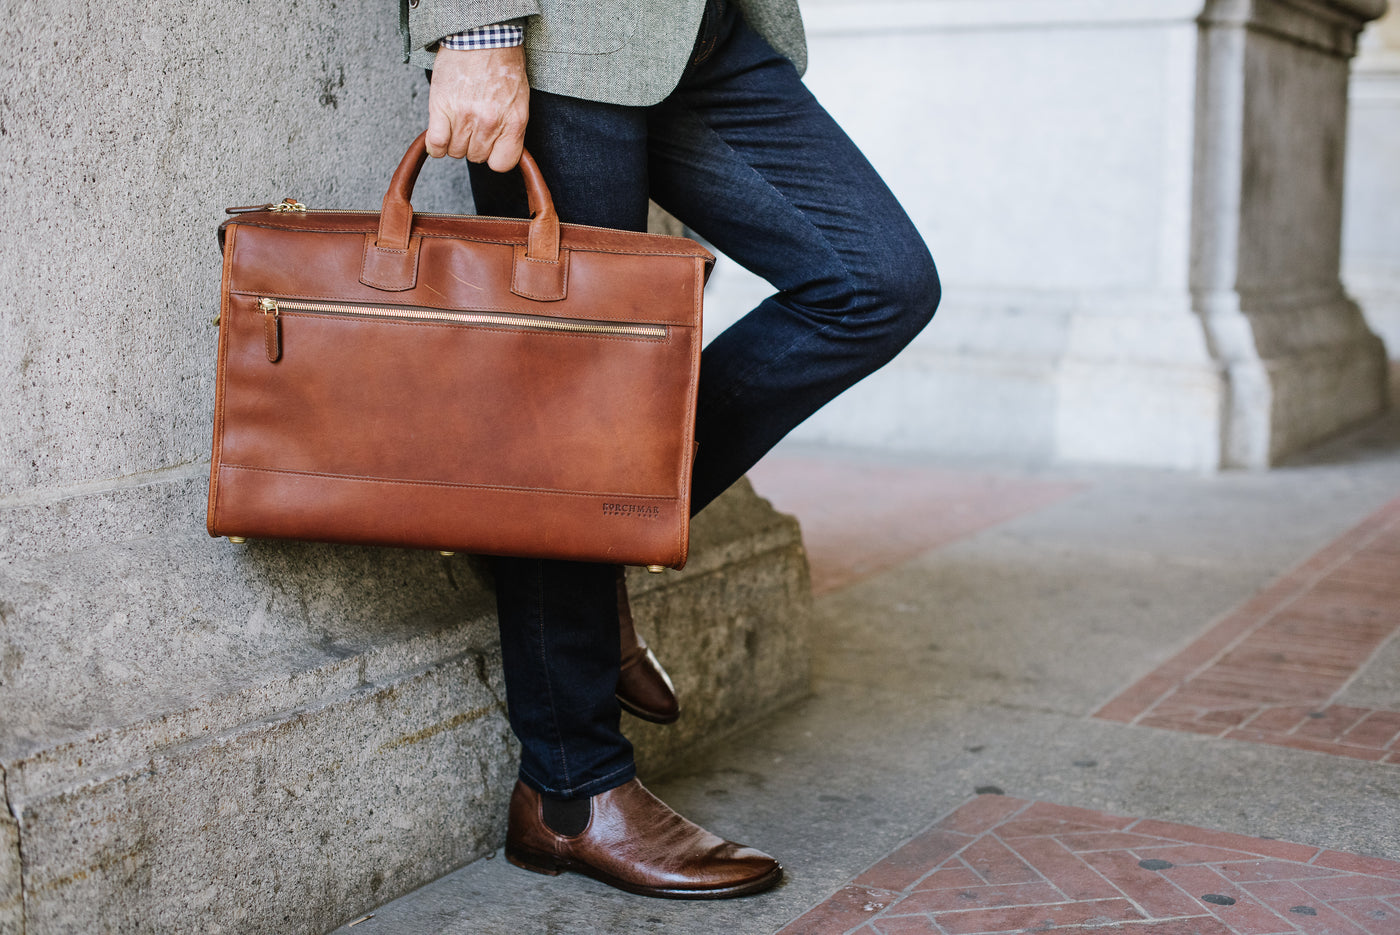 Korchmar - Handcrafted Leather Goods | Since 1917 - Made in USA